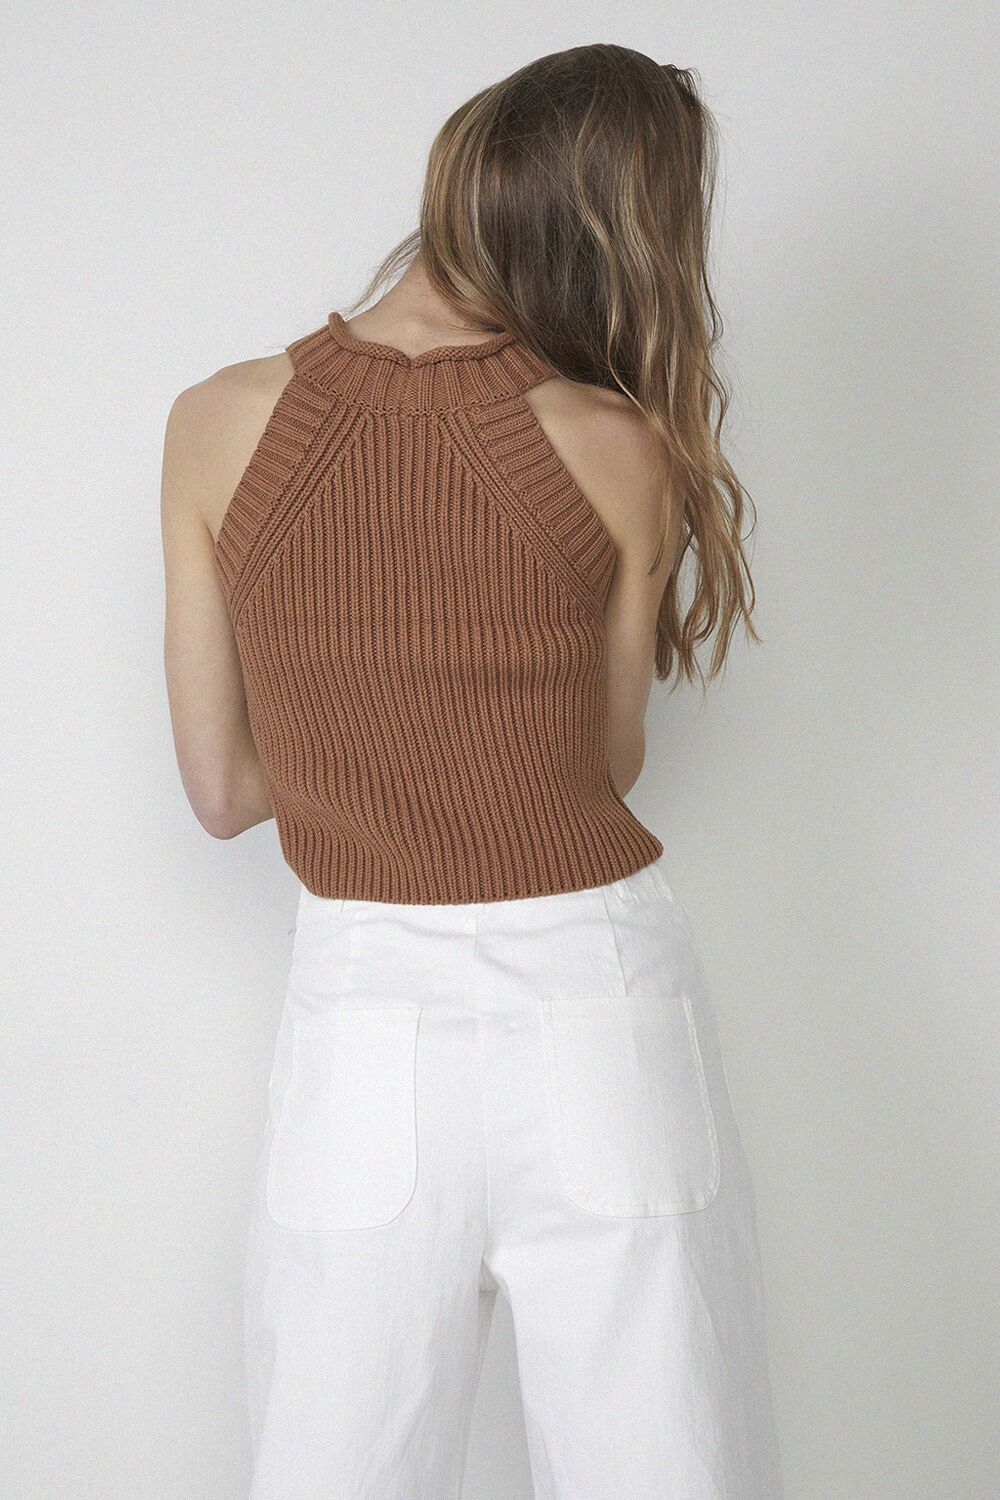 KNIT SLEEVELESS TOP in colour TAN